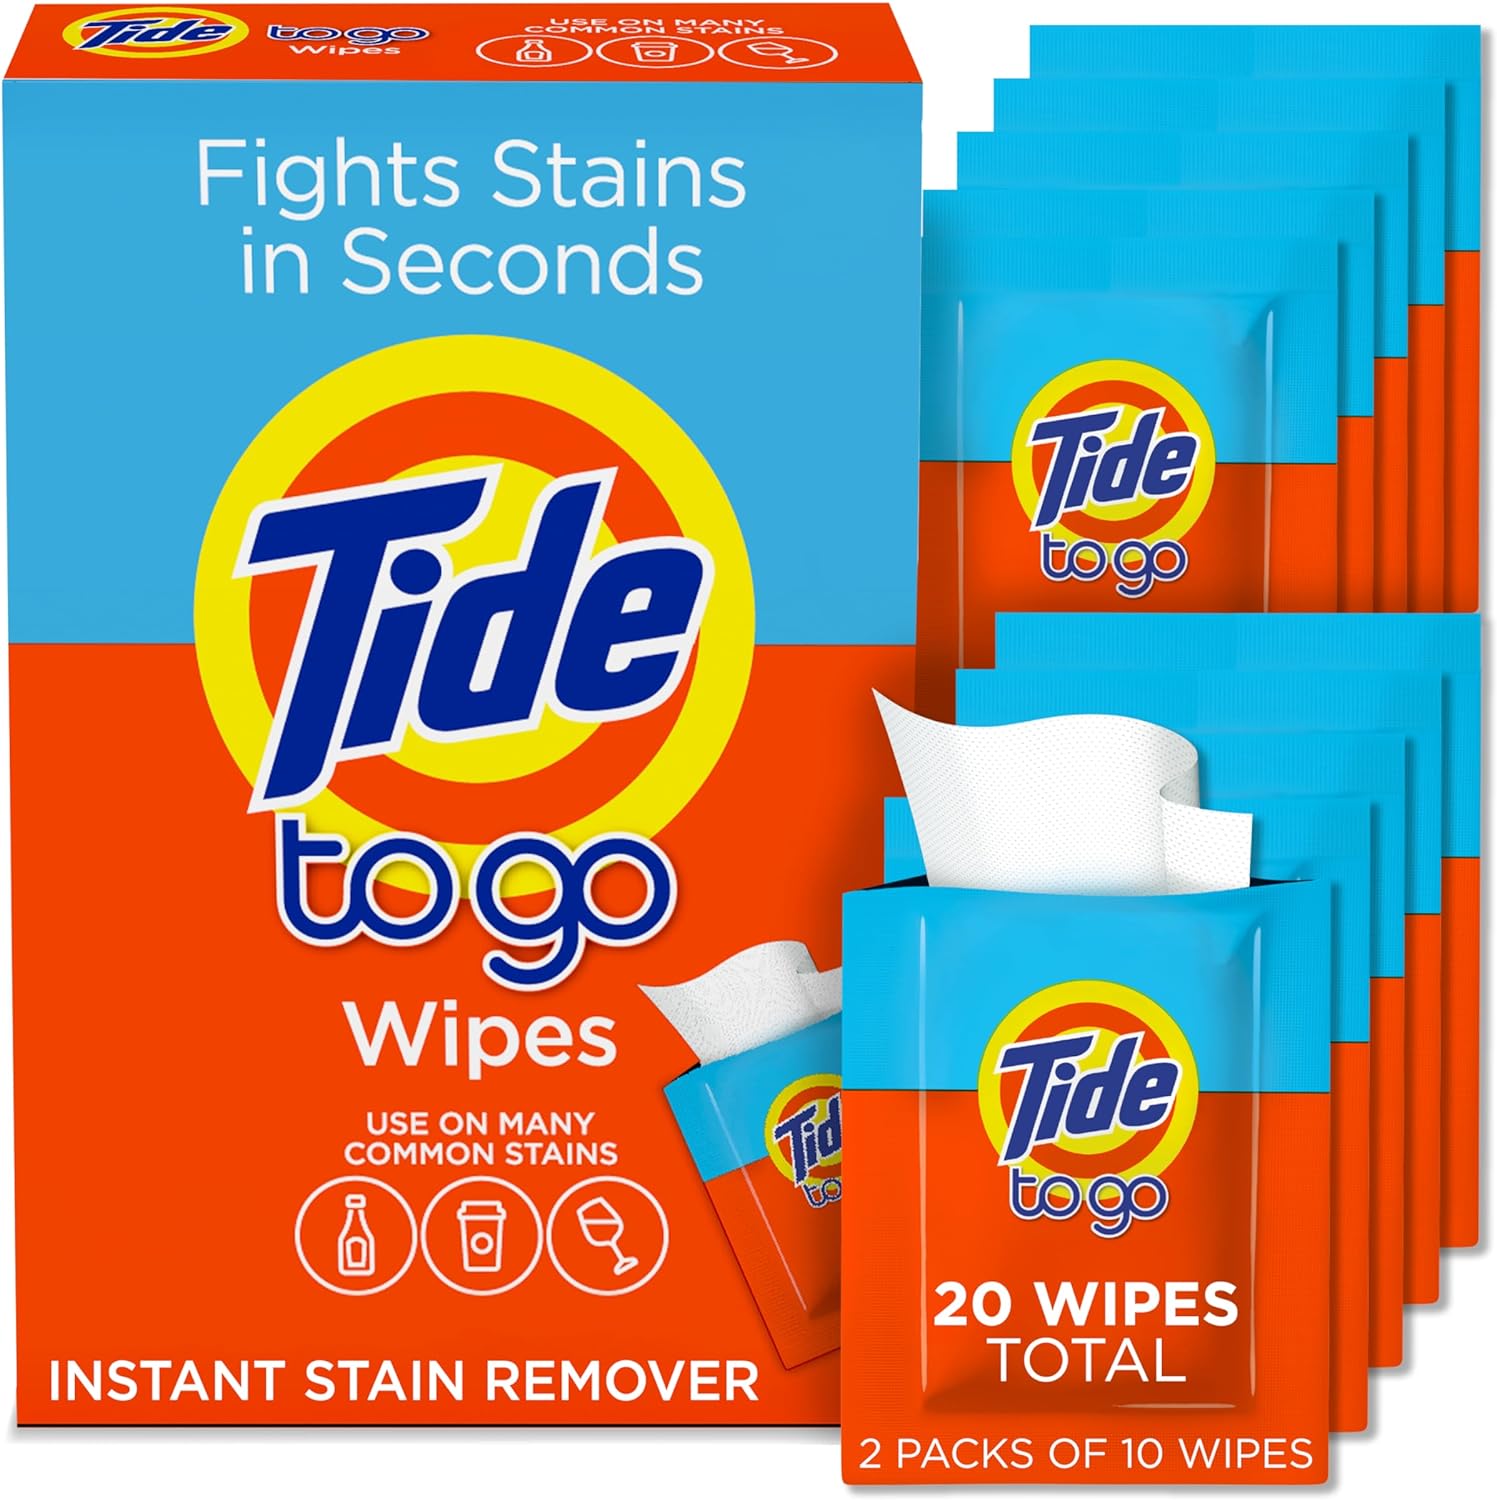 Tide Stain Remover for Clothes, Tide To Go Wipes, Instant Stain Remover for Clothes, Travel & Pocket Size, 20 Count